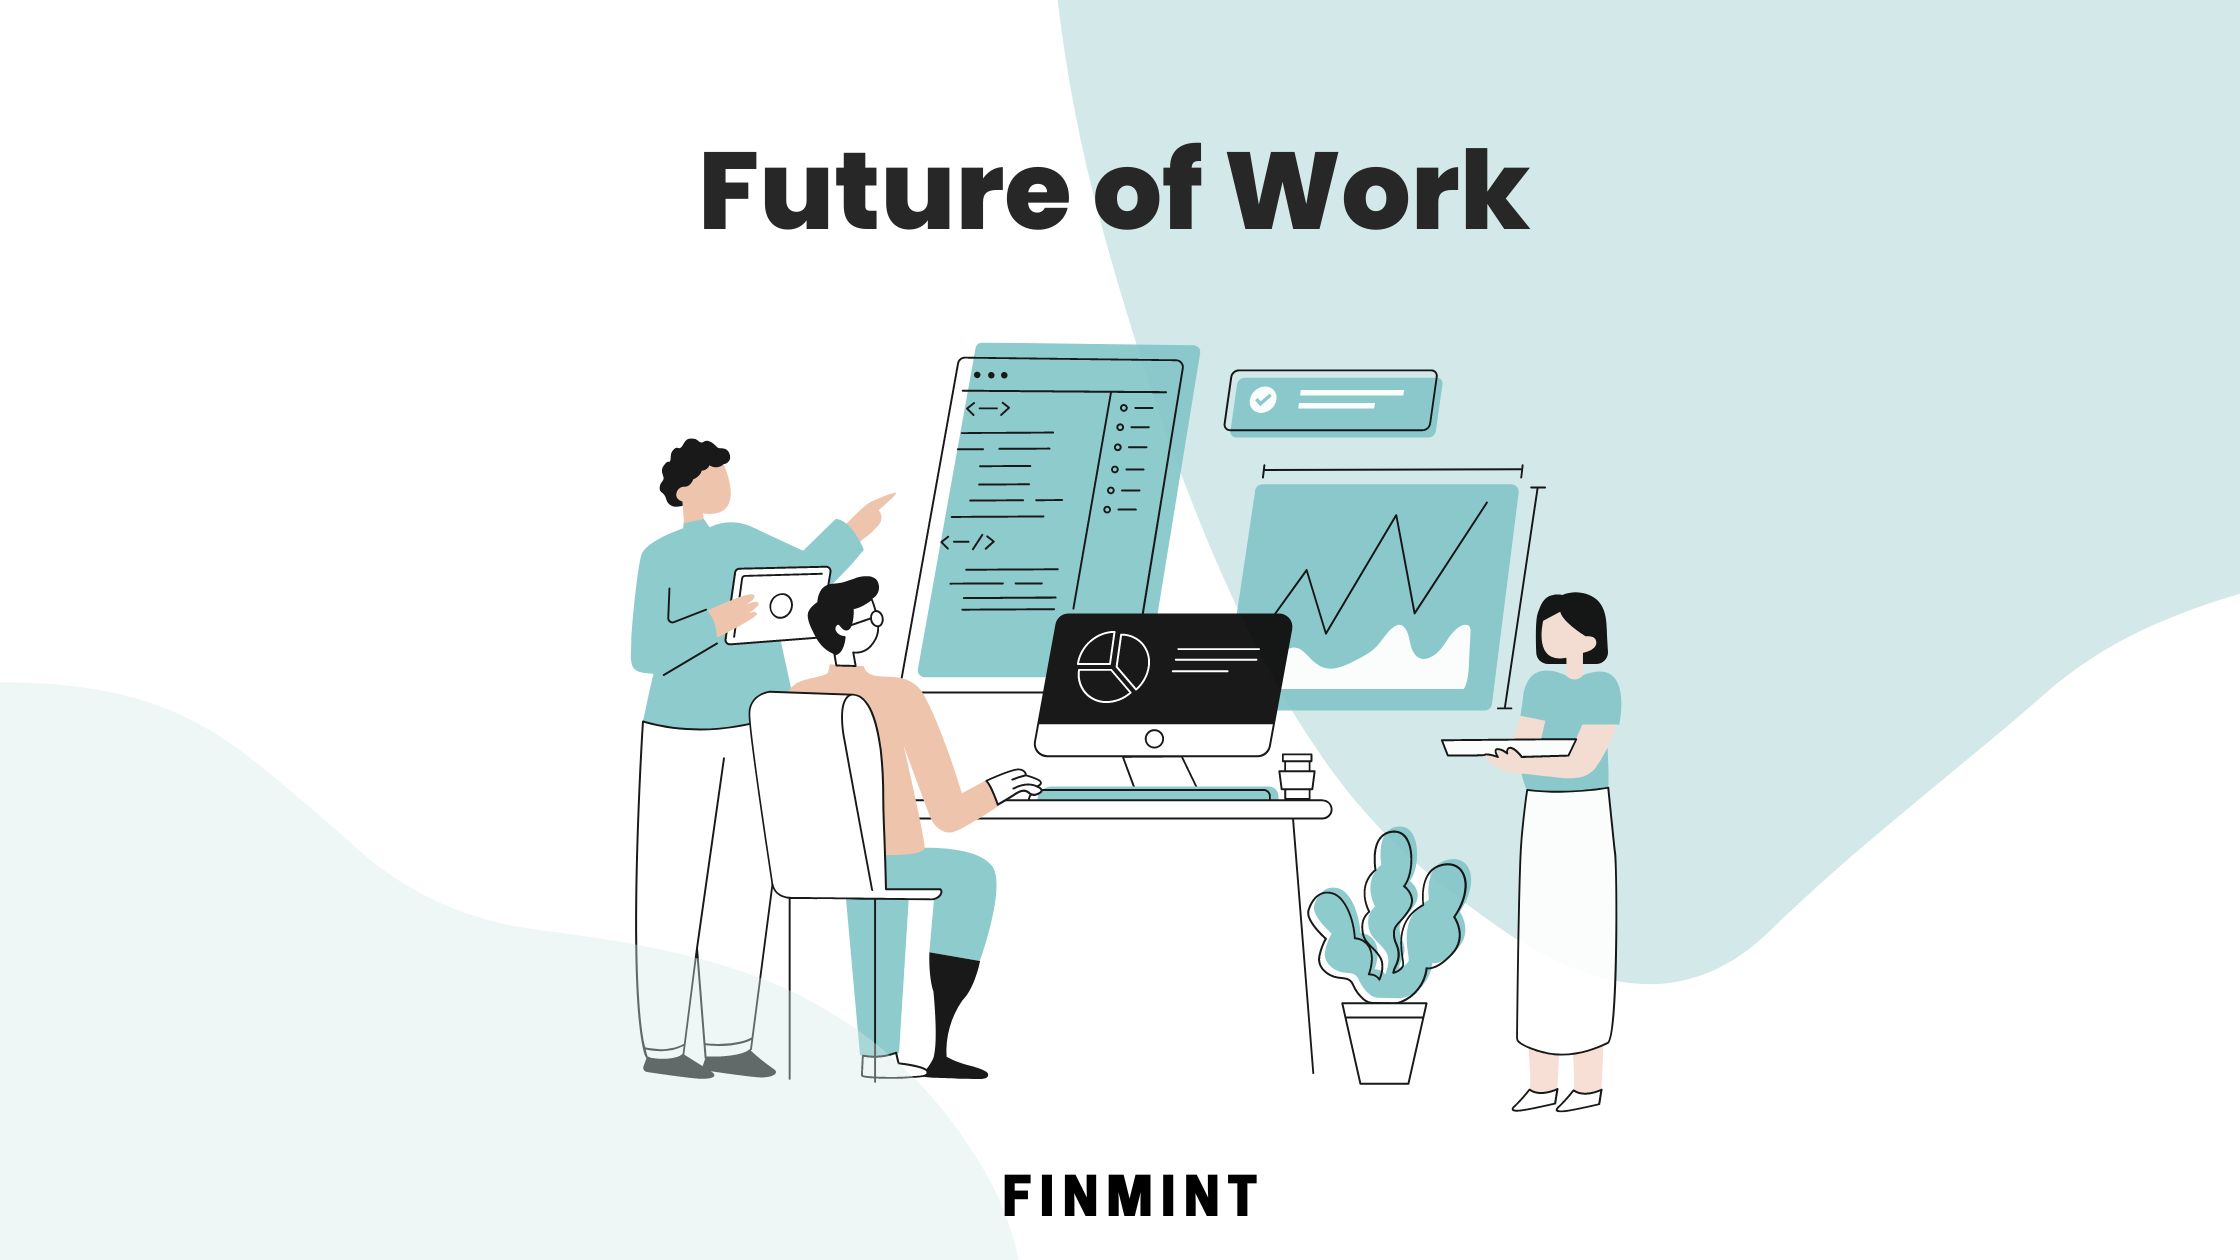 The Future of Work: How Technology is Changing the Way we Work